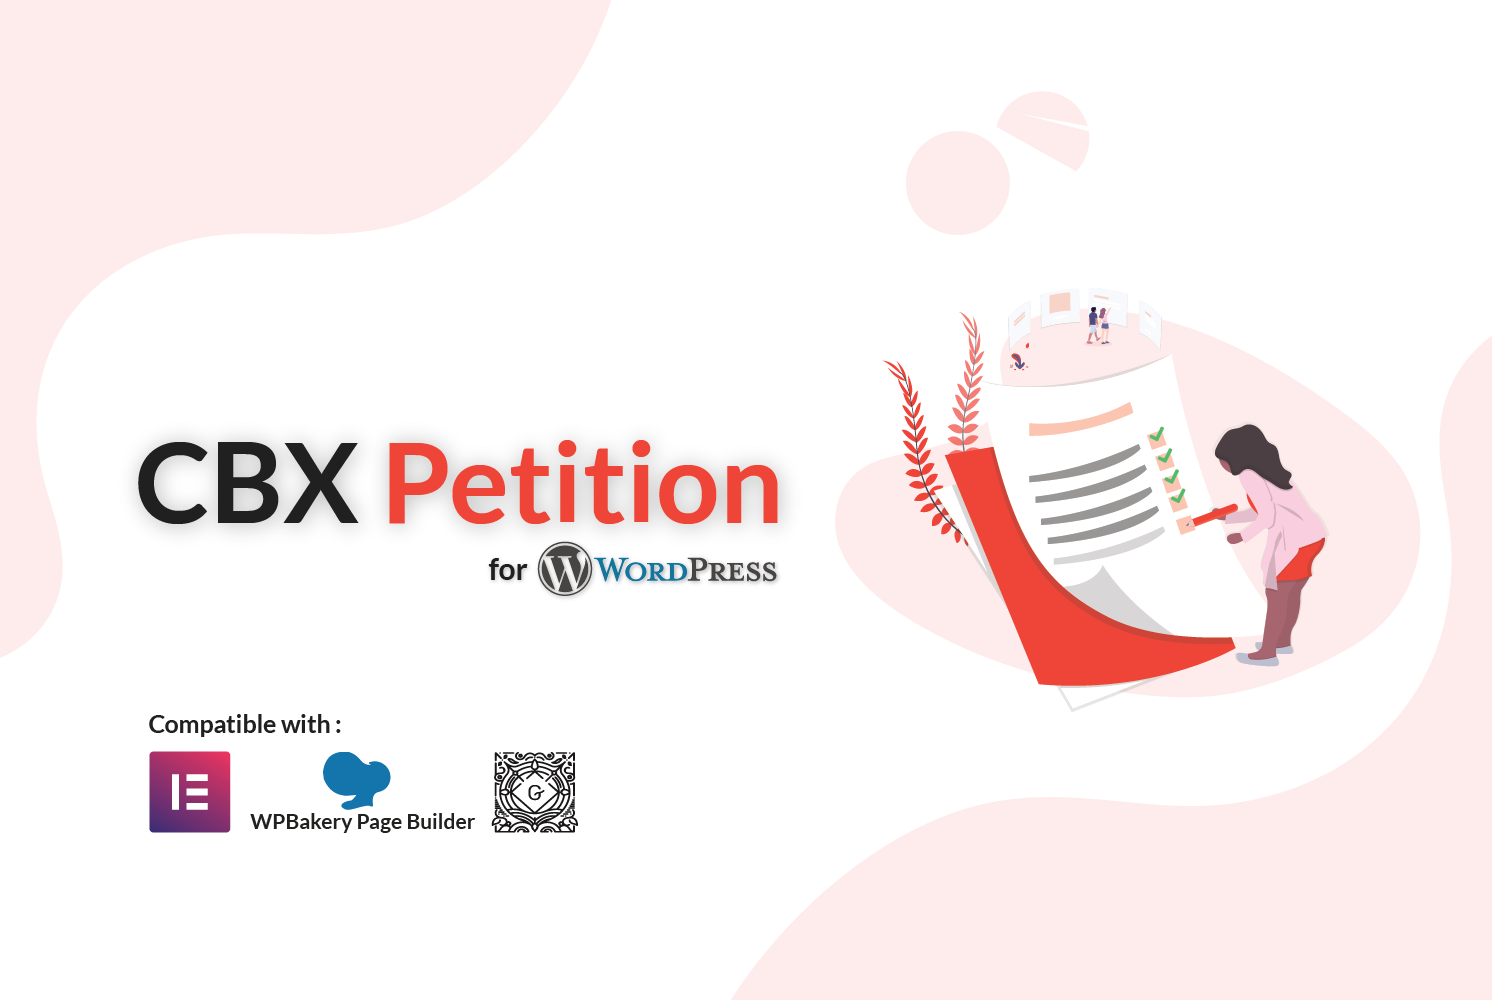 CBX Petition for WordPress